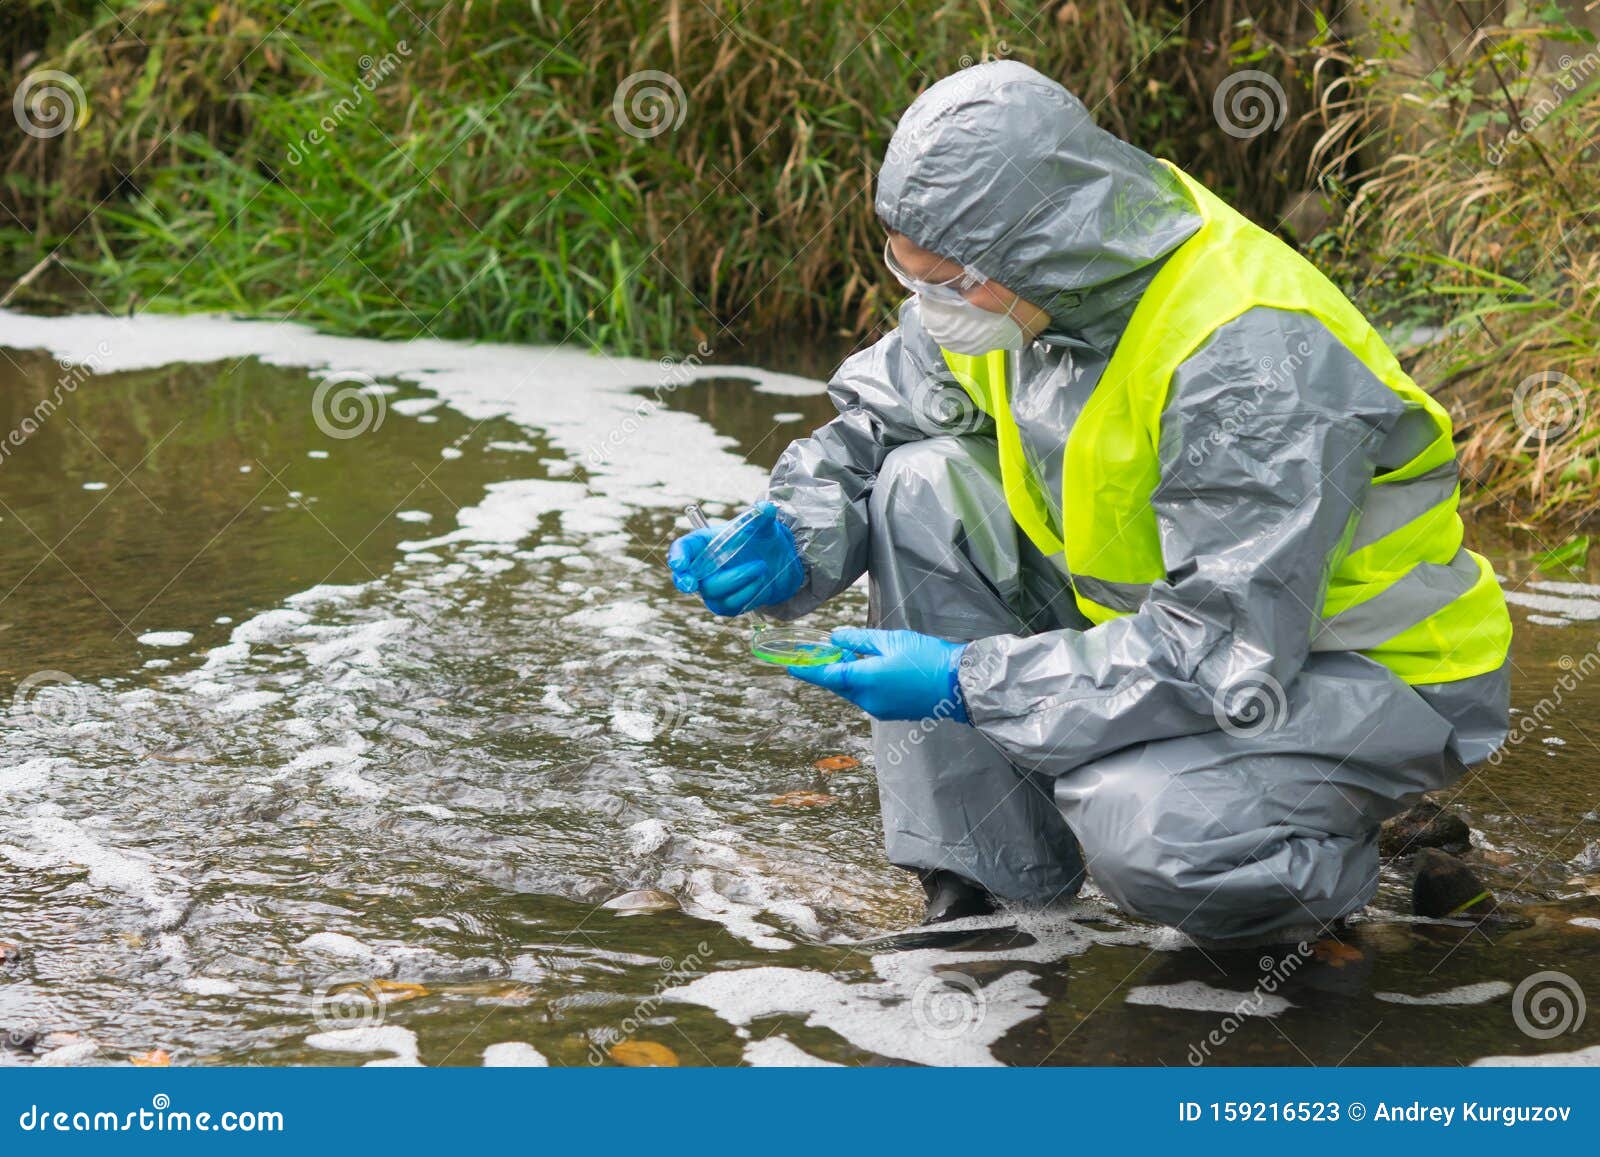 Scientist In A Protective Suit And Mask, Collects ...